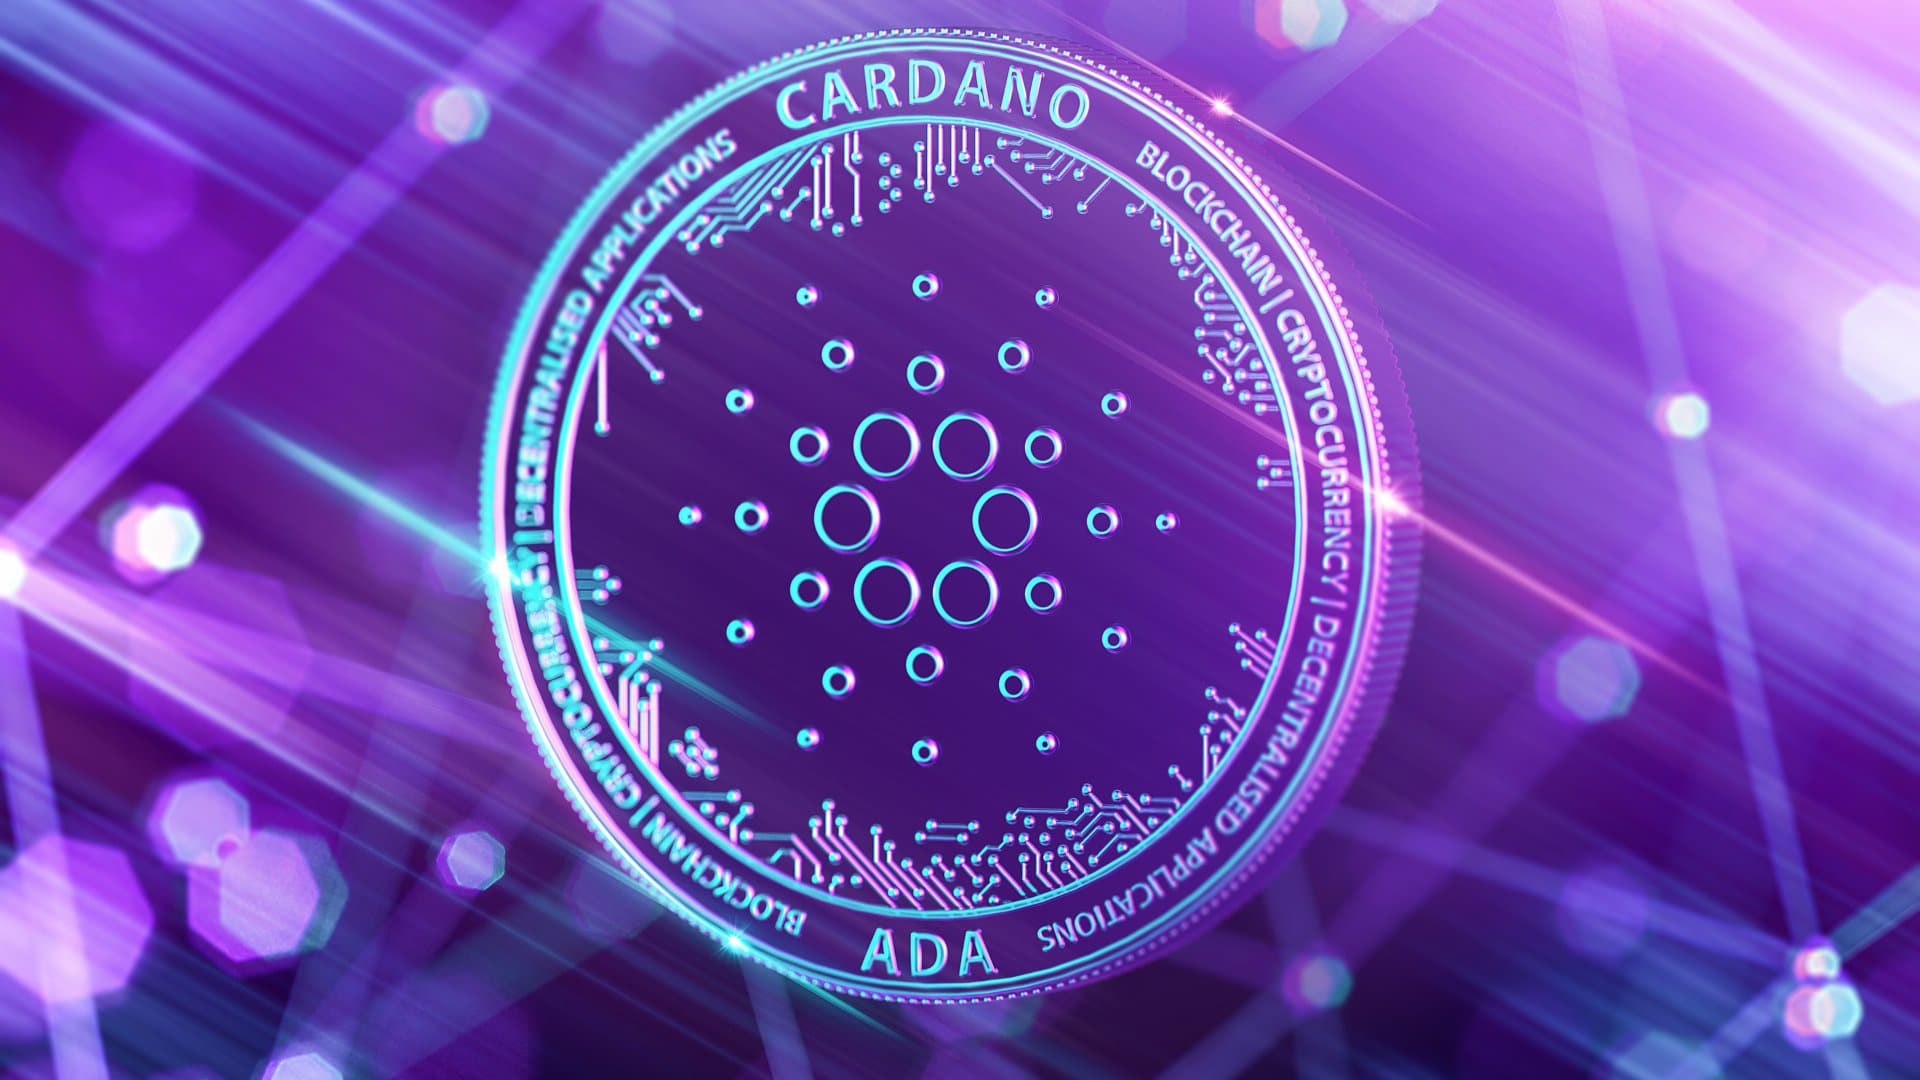 what-blockchain-is-cardano-on